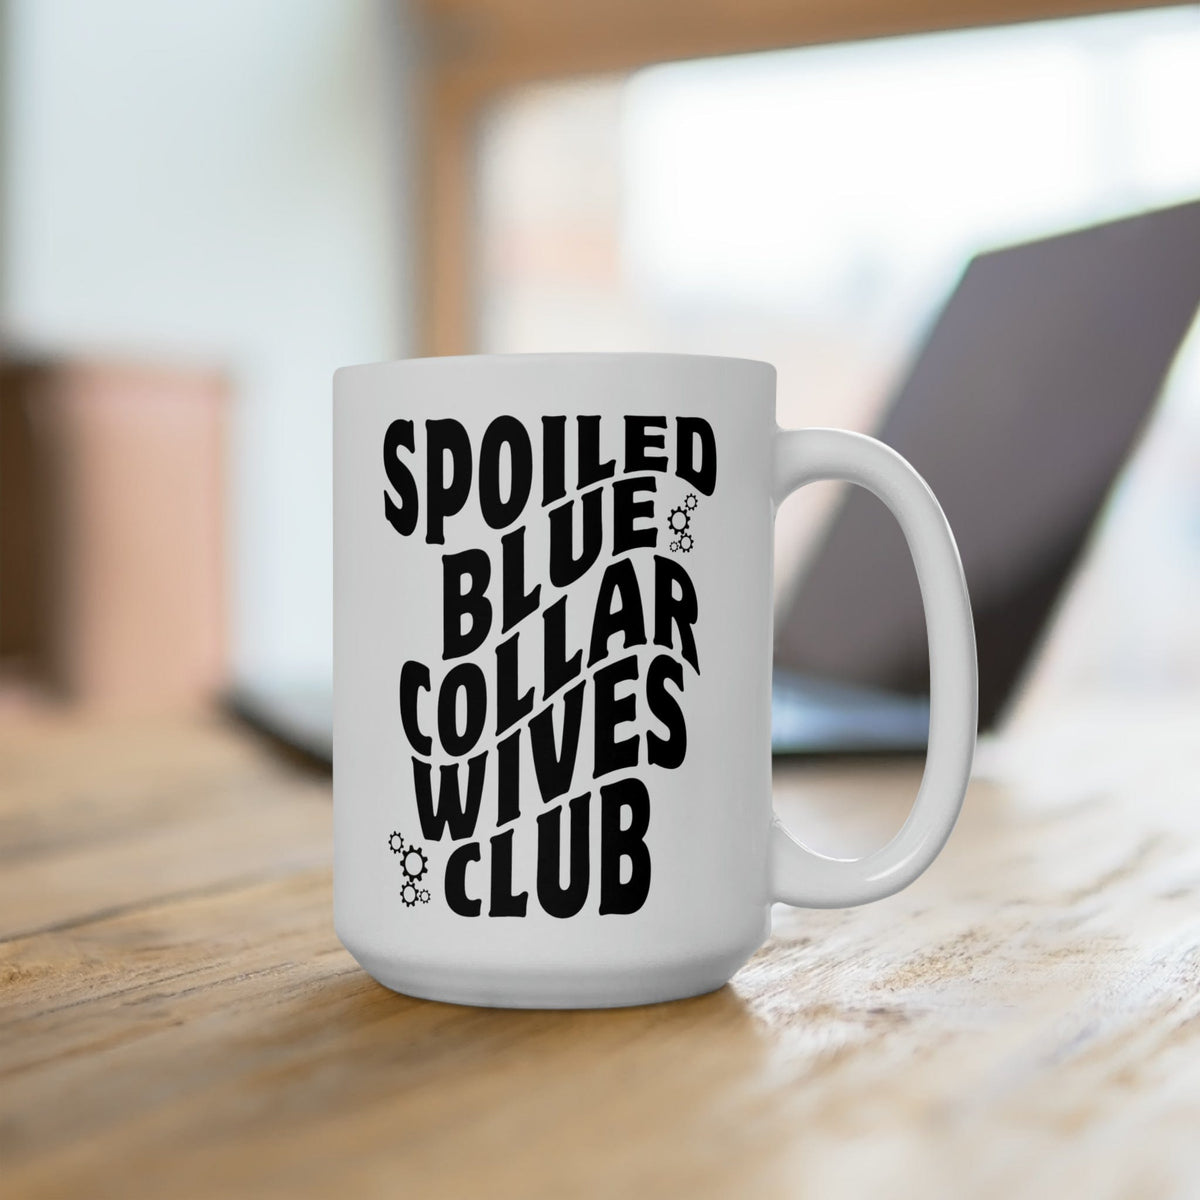 Spoiled Blue Collar Wives Club Ceramic Mug 15oz| Blue Collar Wife Coffee Cup | Great Gift For Wife or Friend Mug TheFringeCultureCollective